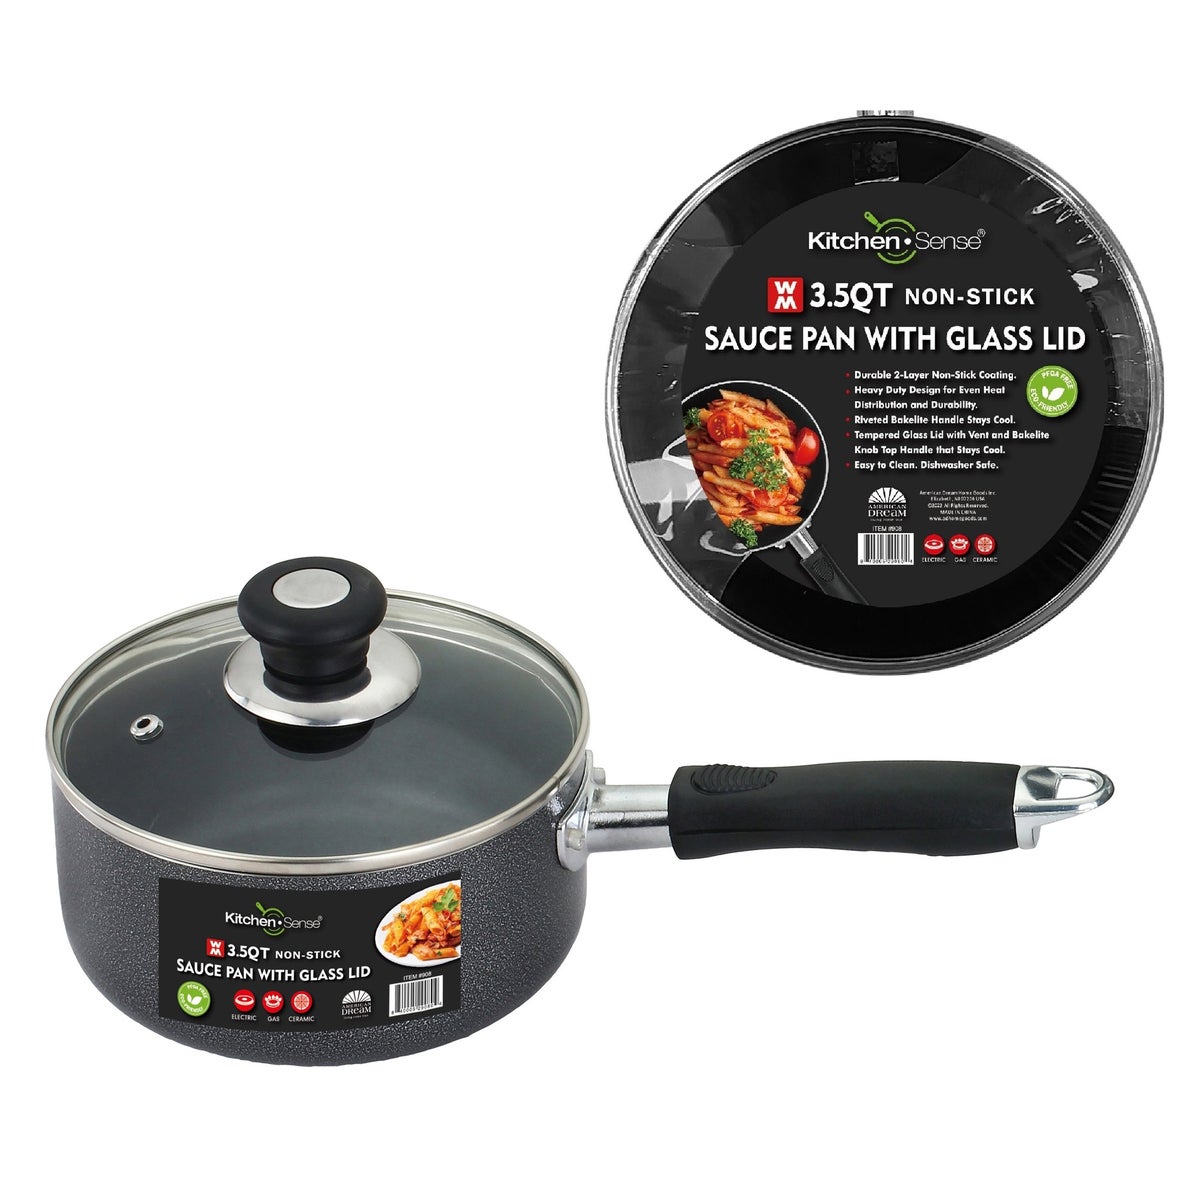 3.5Qt Non-Stick Sauce Pan with Glass Lid (6)